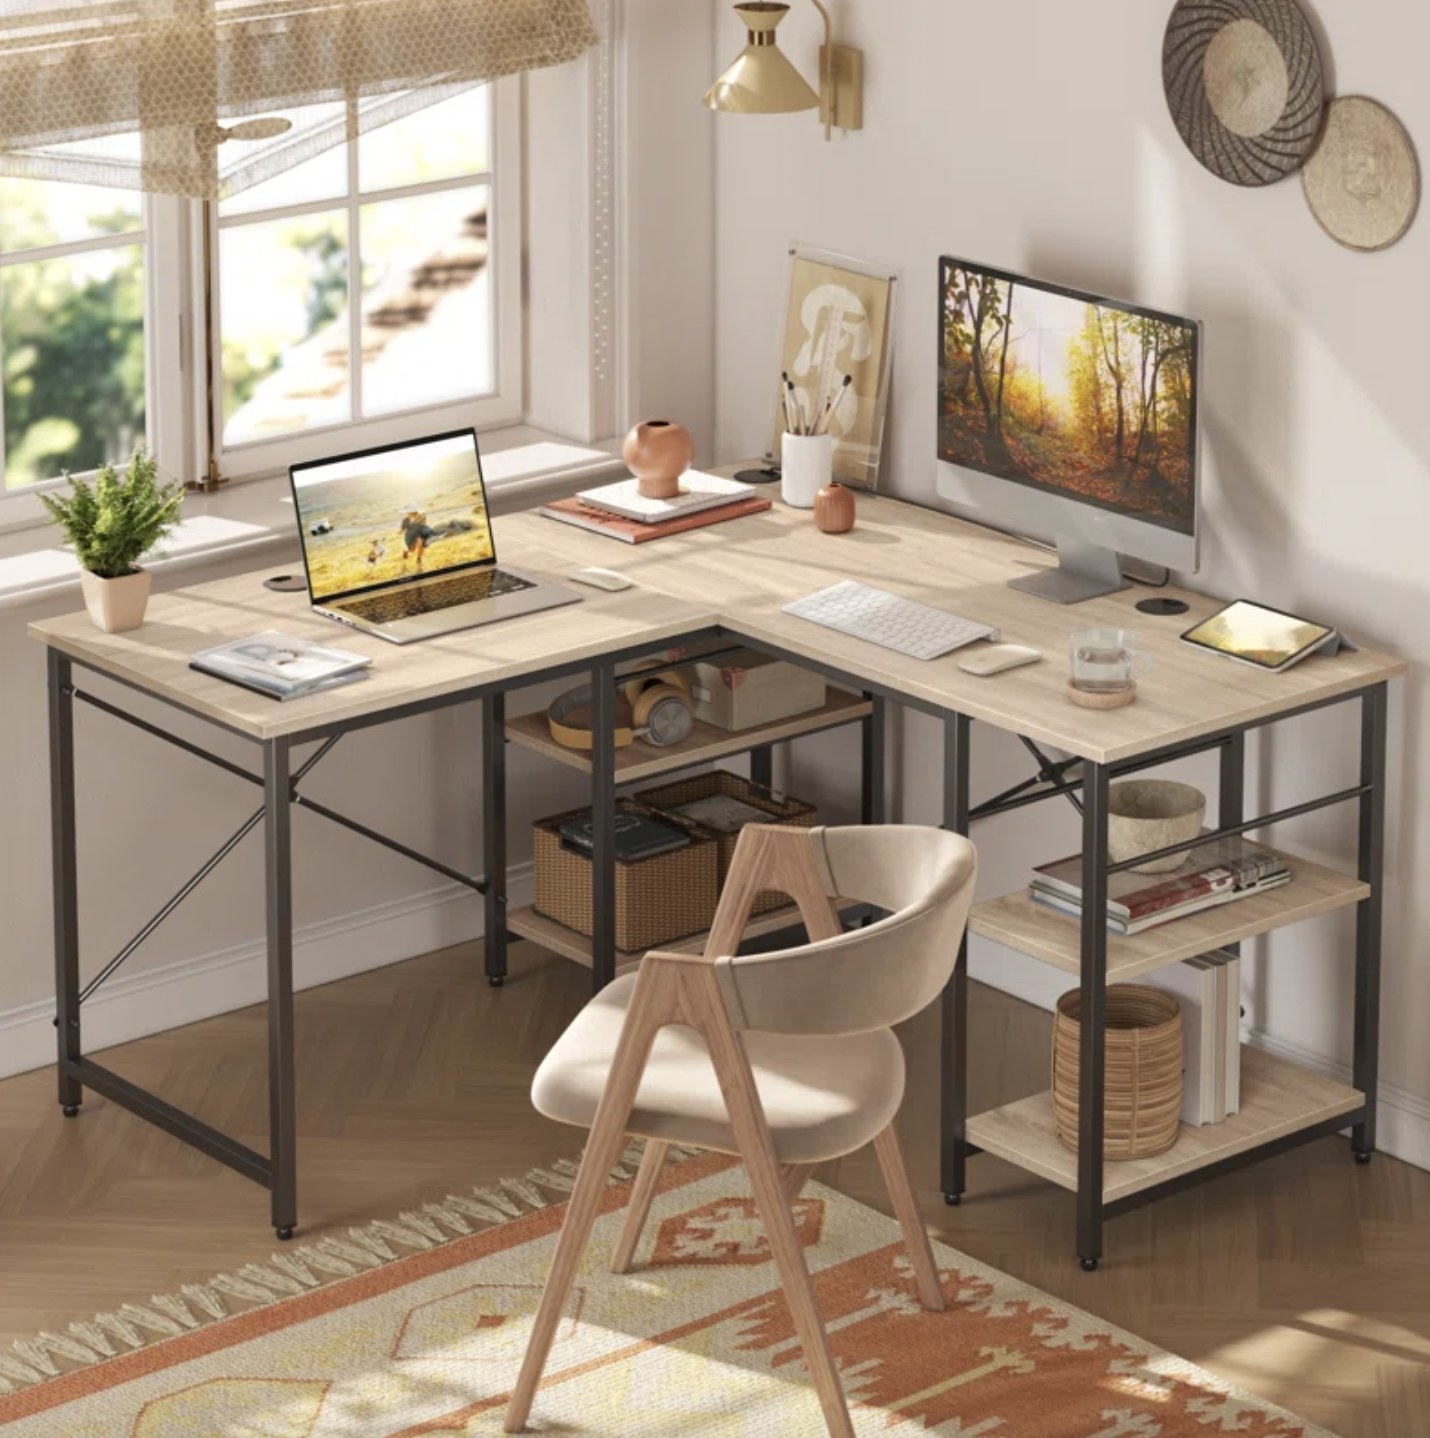 An L-shaped desk with two computers on it